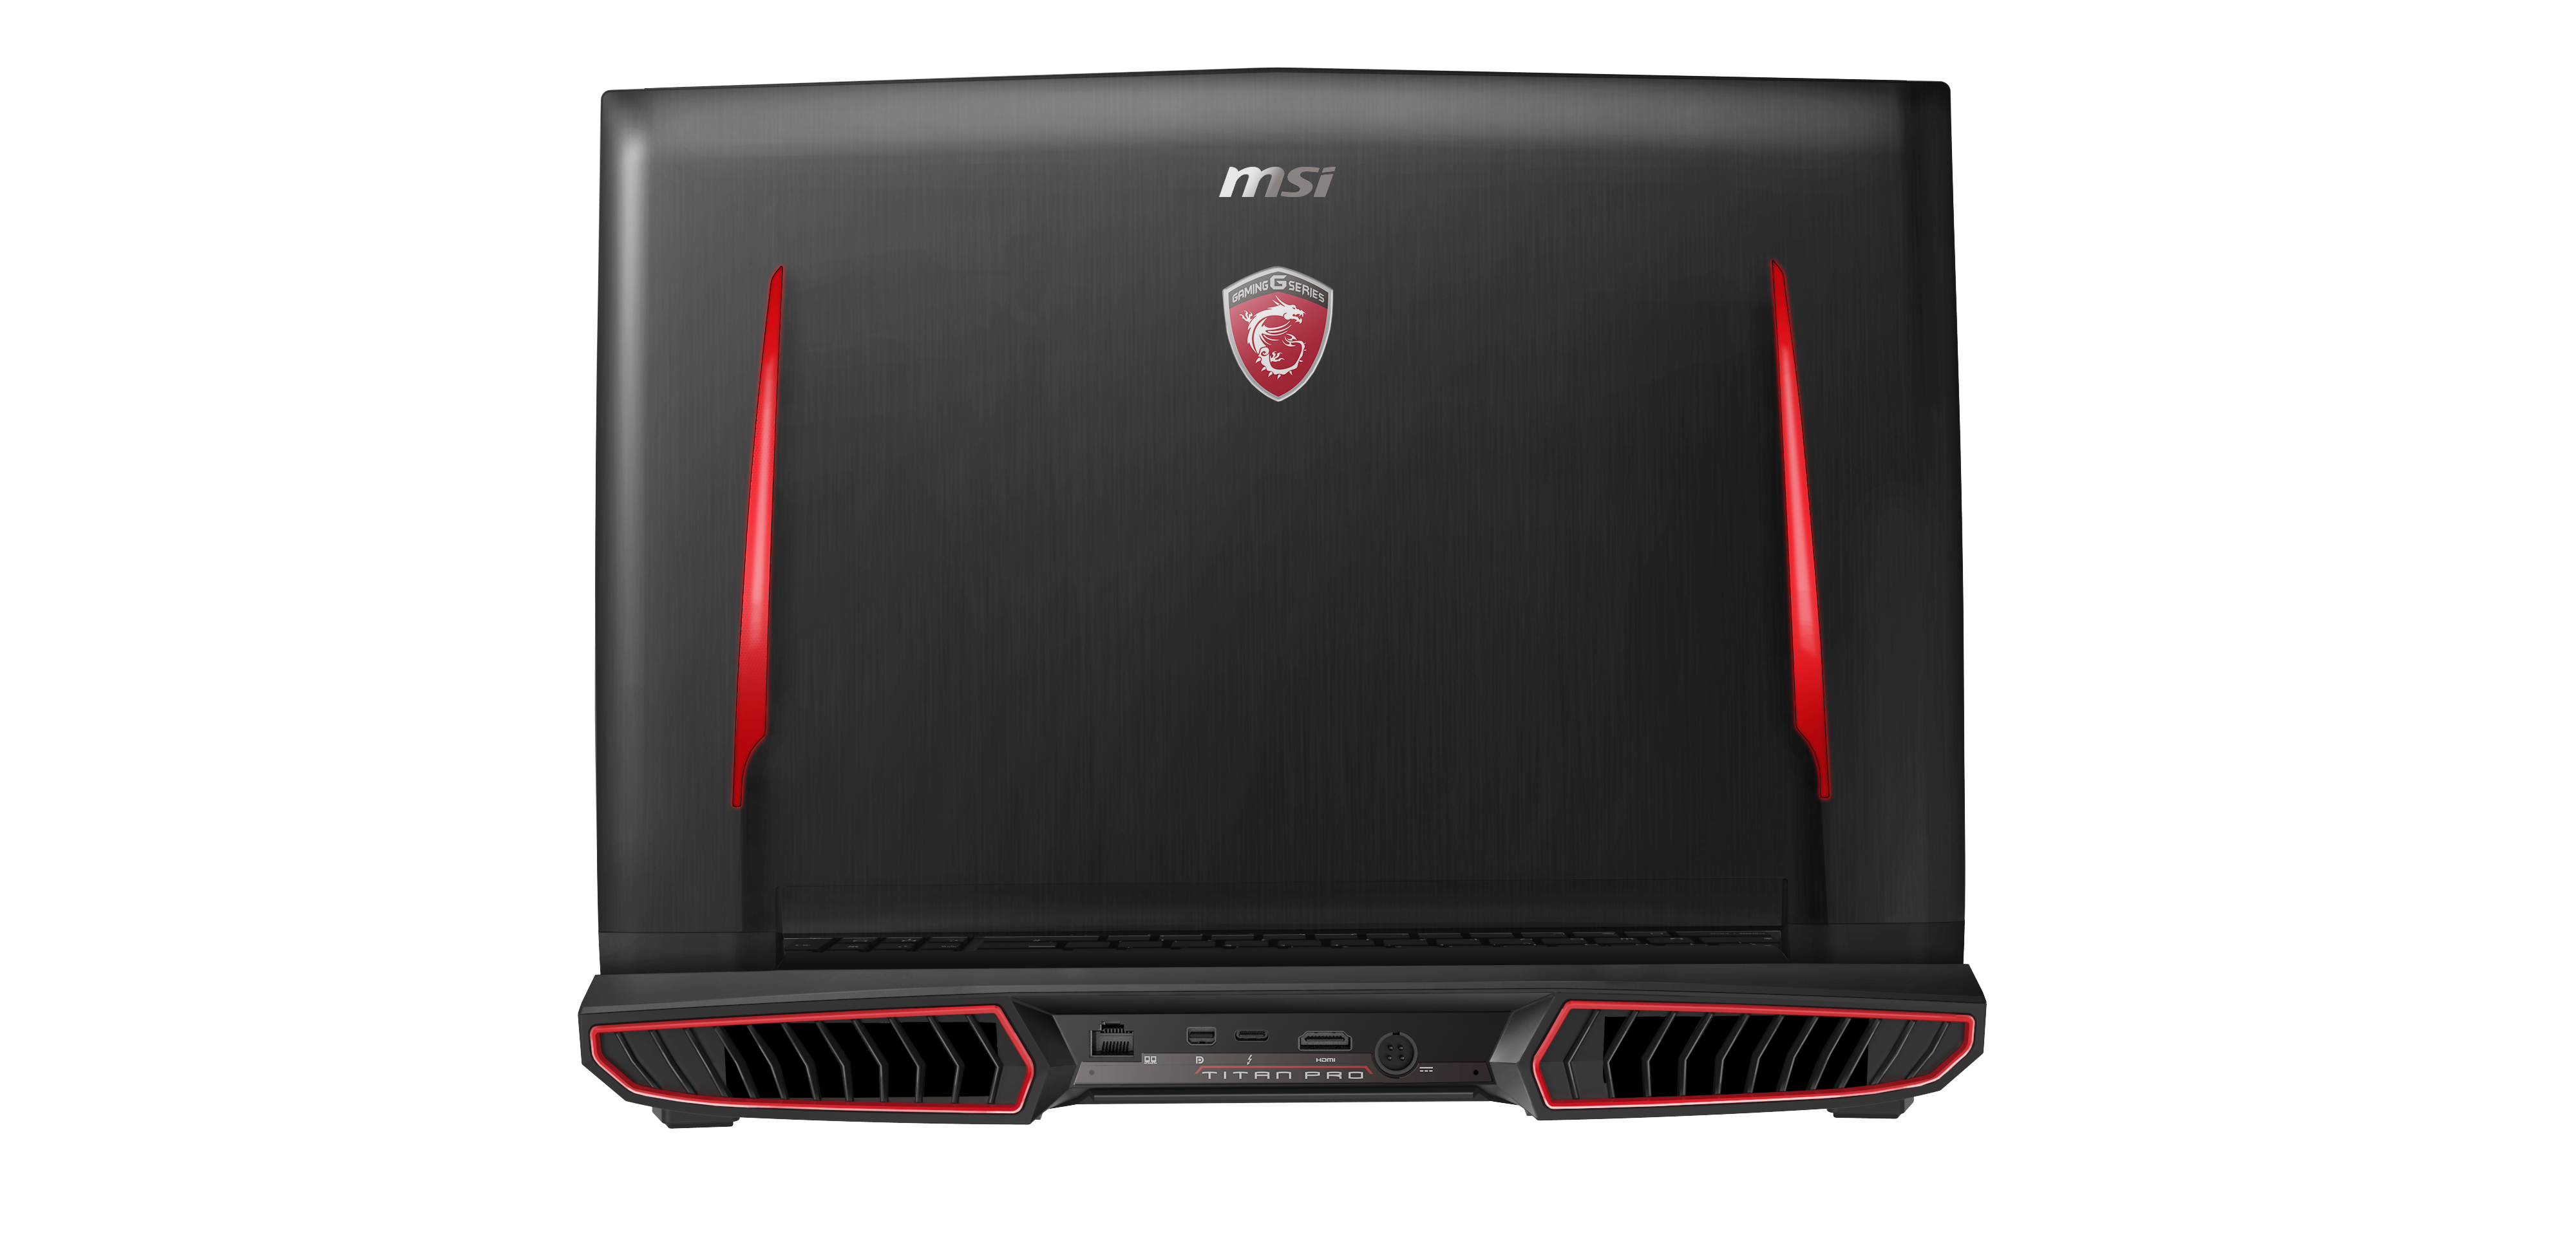 MSI’s new GT83 Titan SLI and GT73 Titan SLI laptops are both built ready for the best of virtual reality gaming